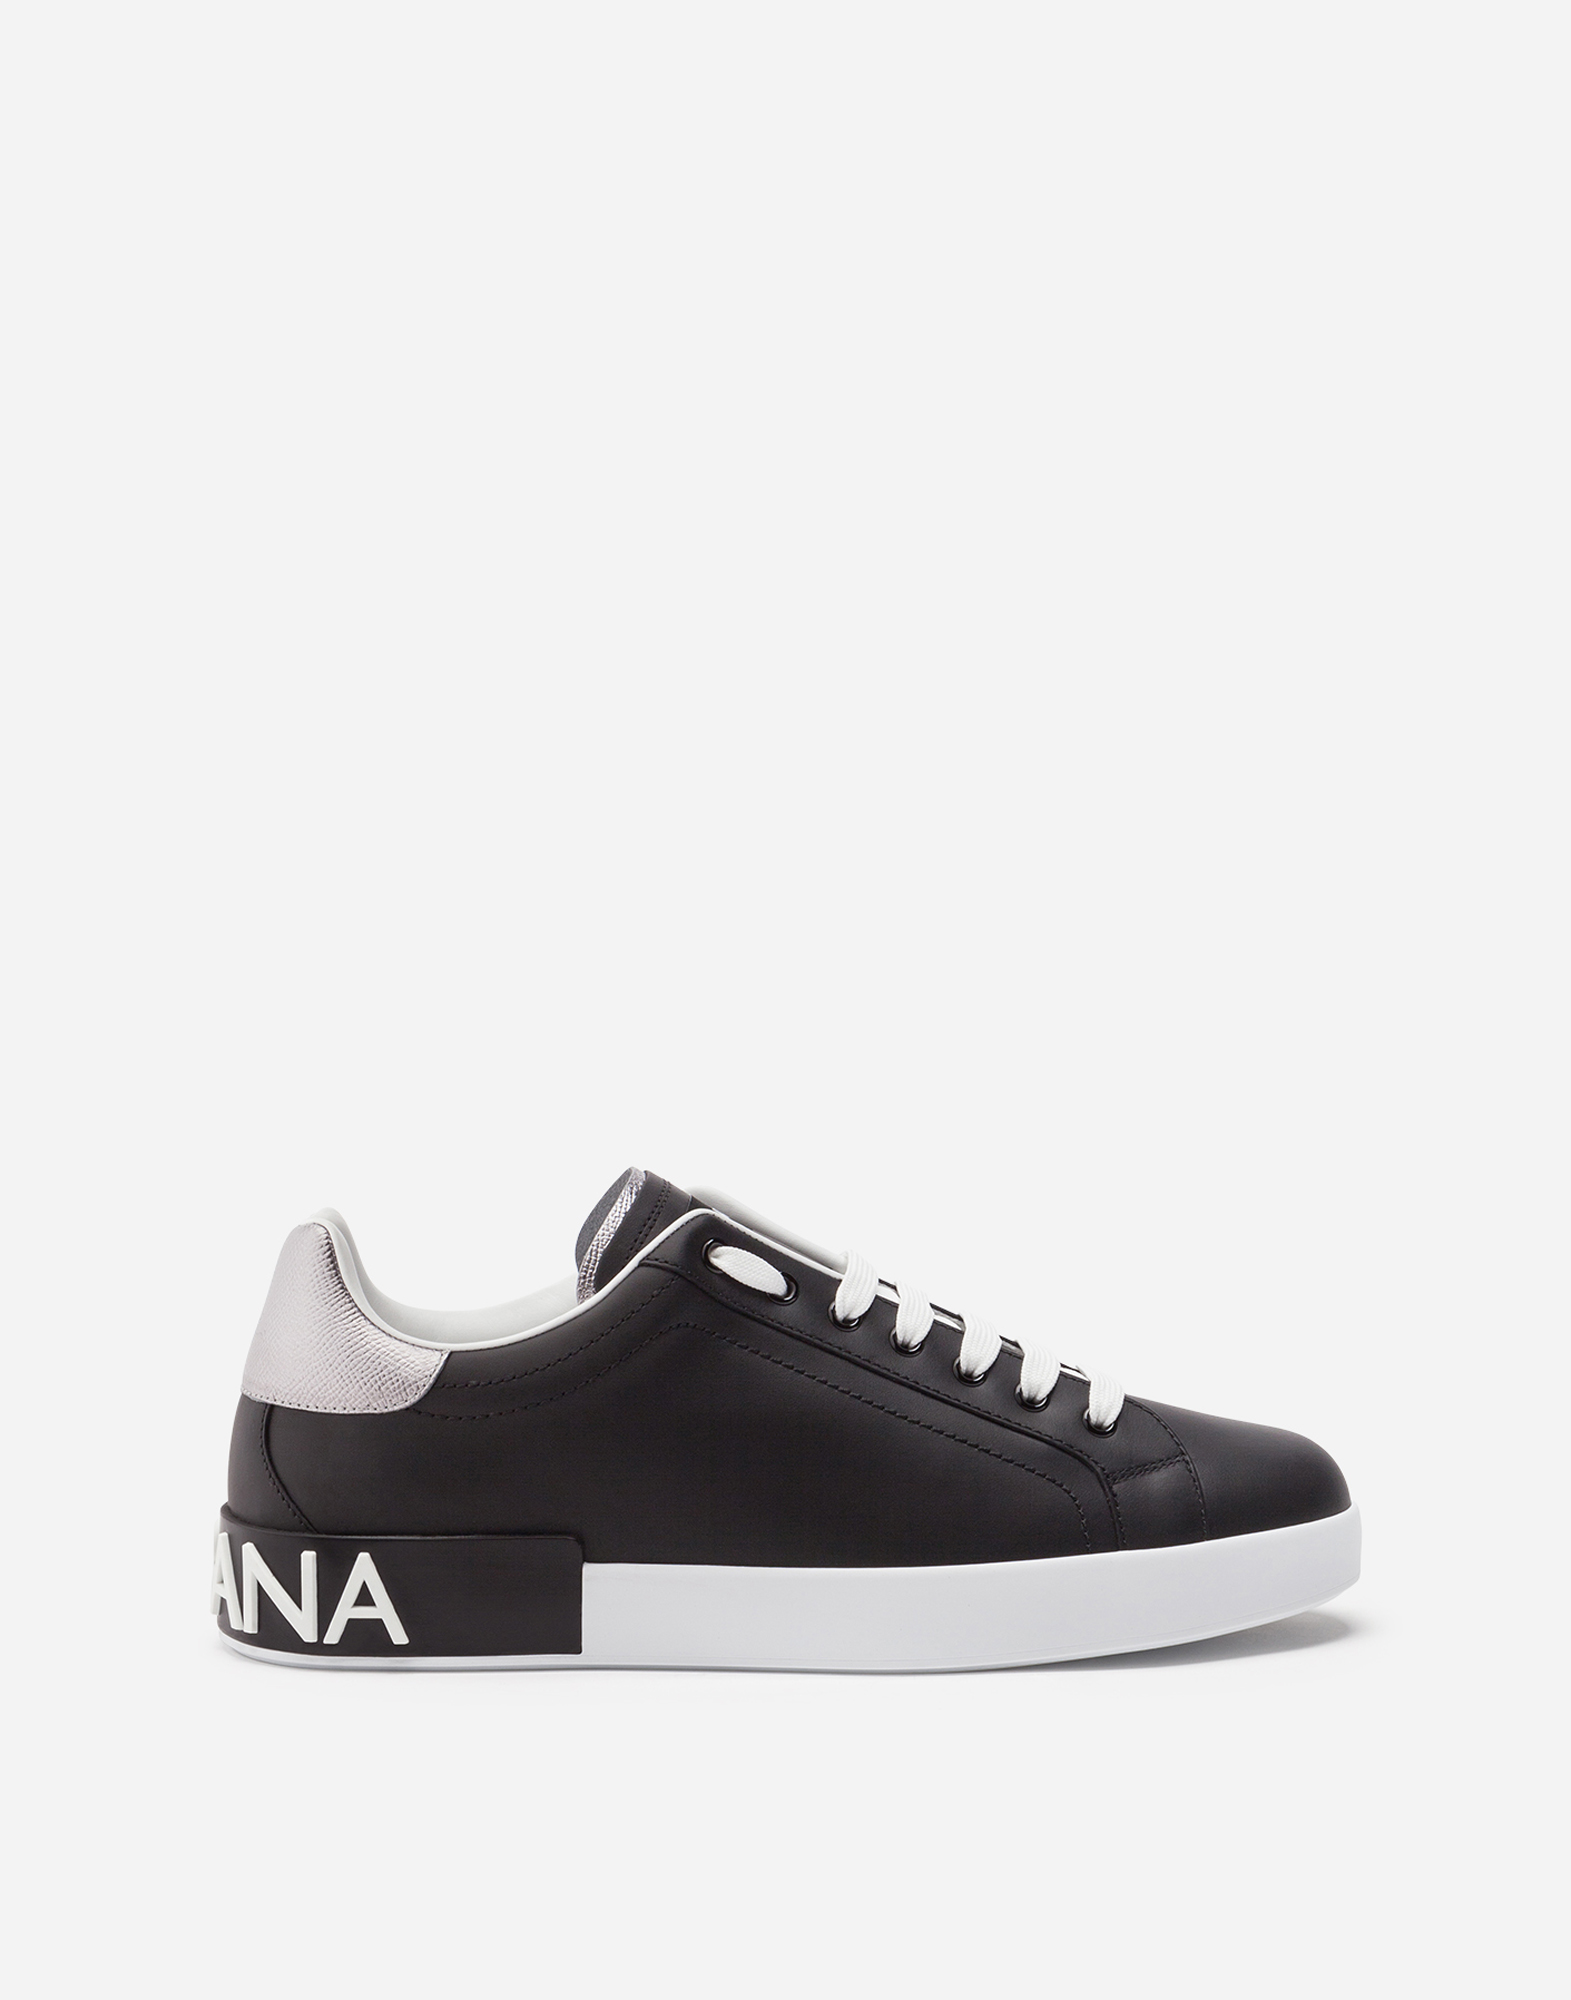 dolce and gabbana sneakers black and white